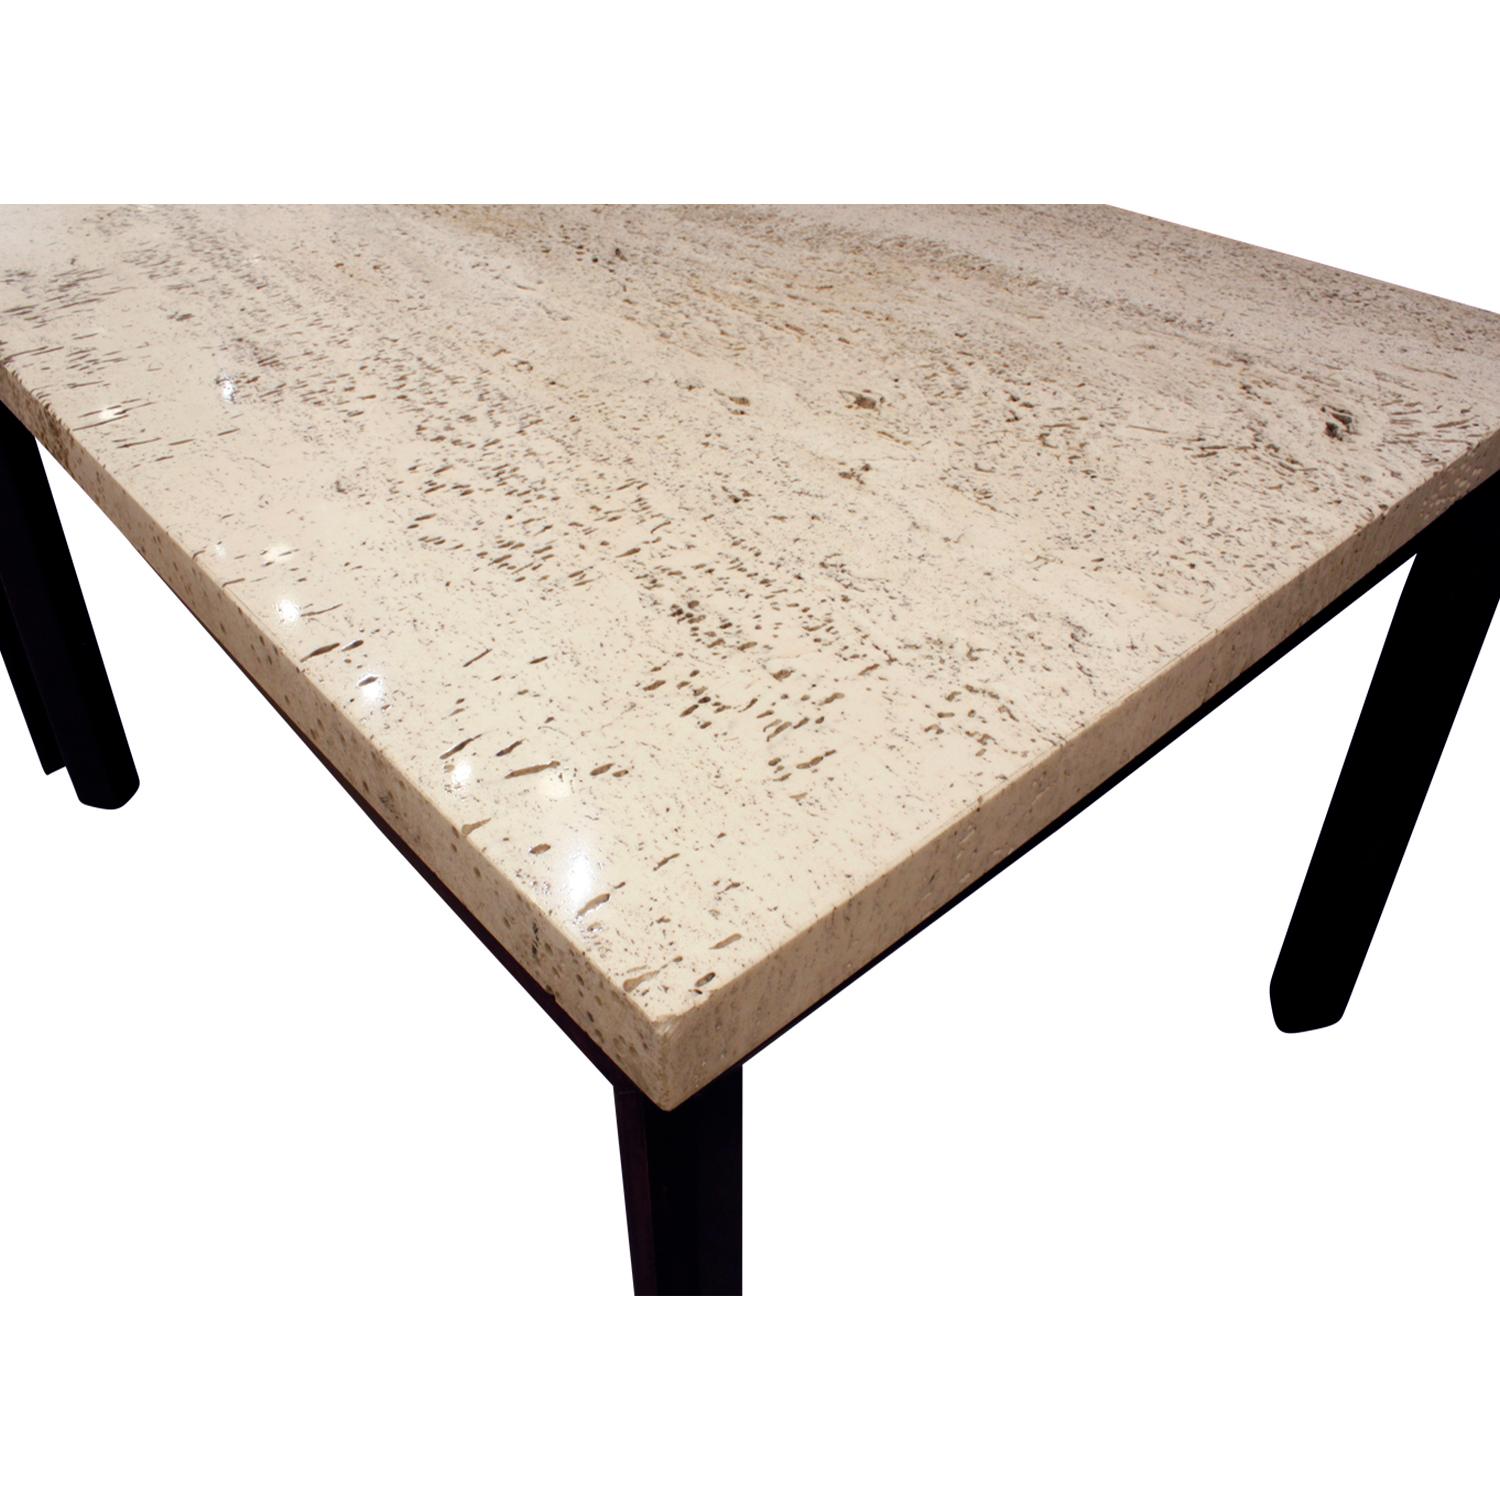 Pair of Angular Leg Coffee Tables with Travertine Tops, 1950s In Excellent Condition For Sale In New York, NY